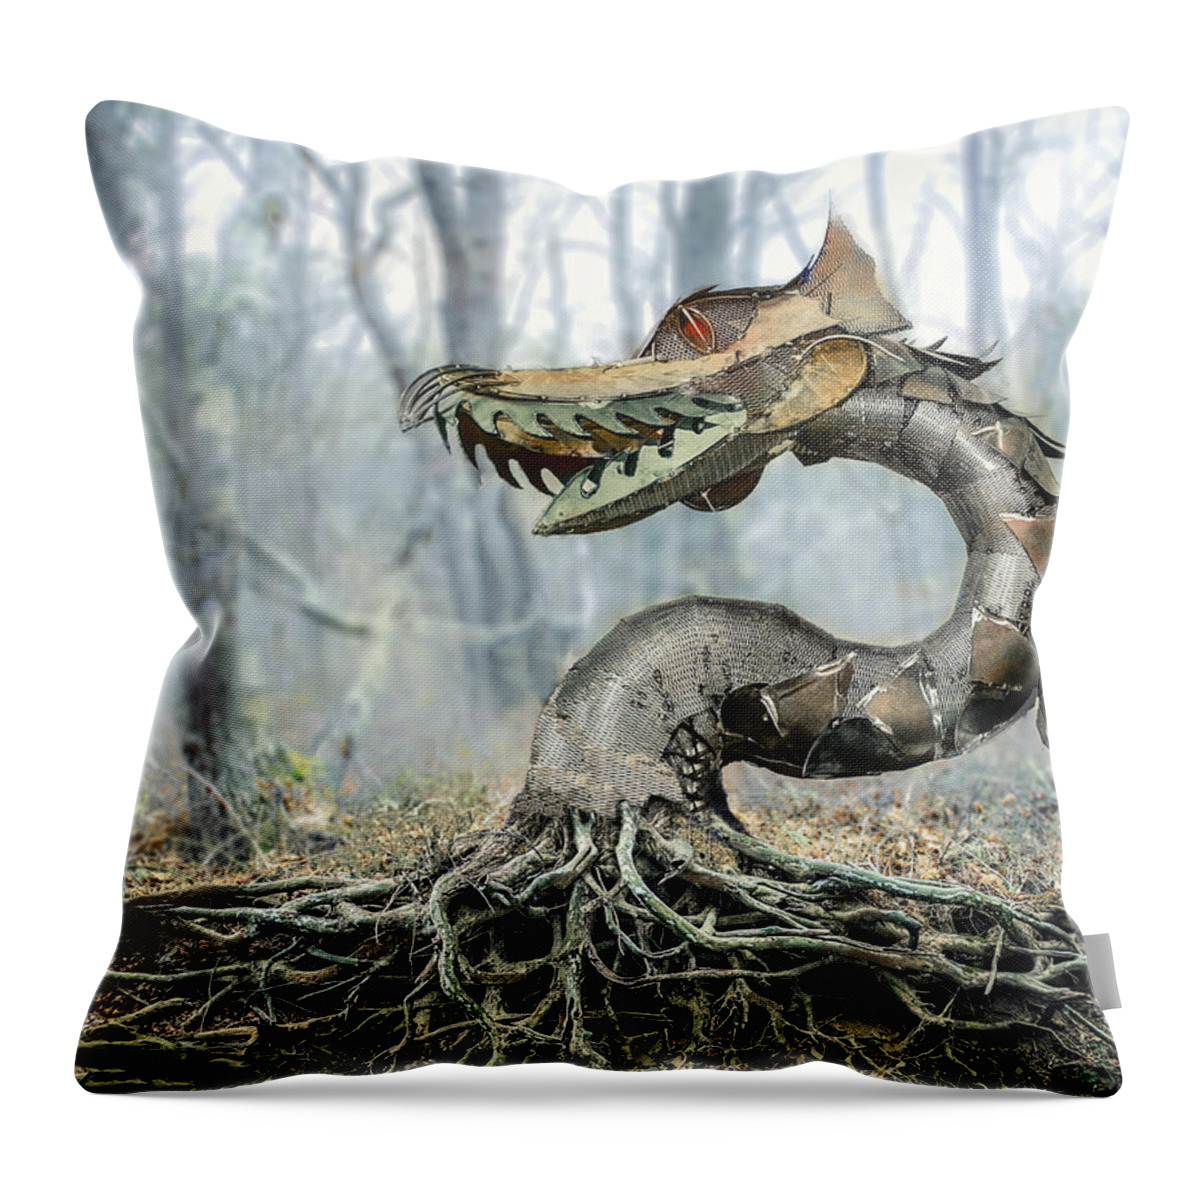 Dragon Throw Pillow featuring the digital art Dragon Root by Rick Mosher